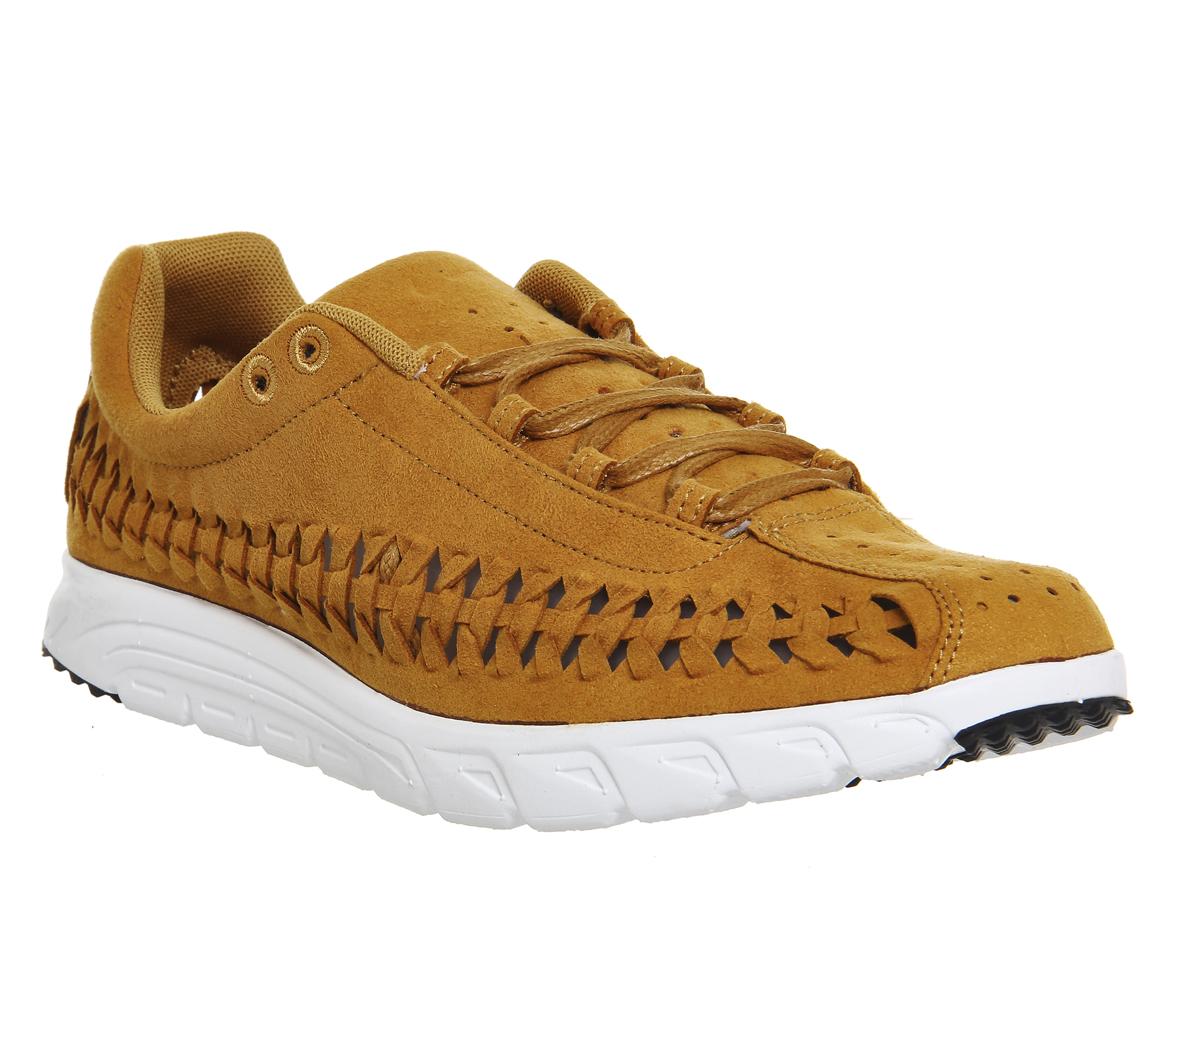 Nike Mayfly Woven Bronze - His trainers